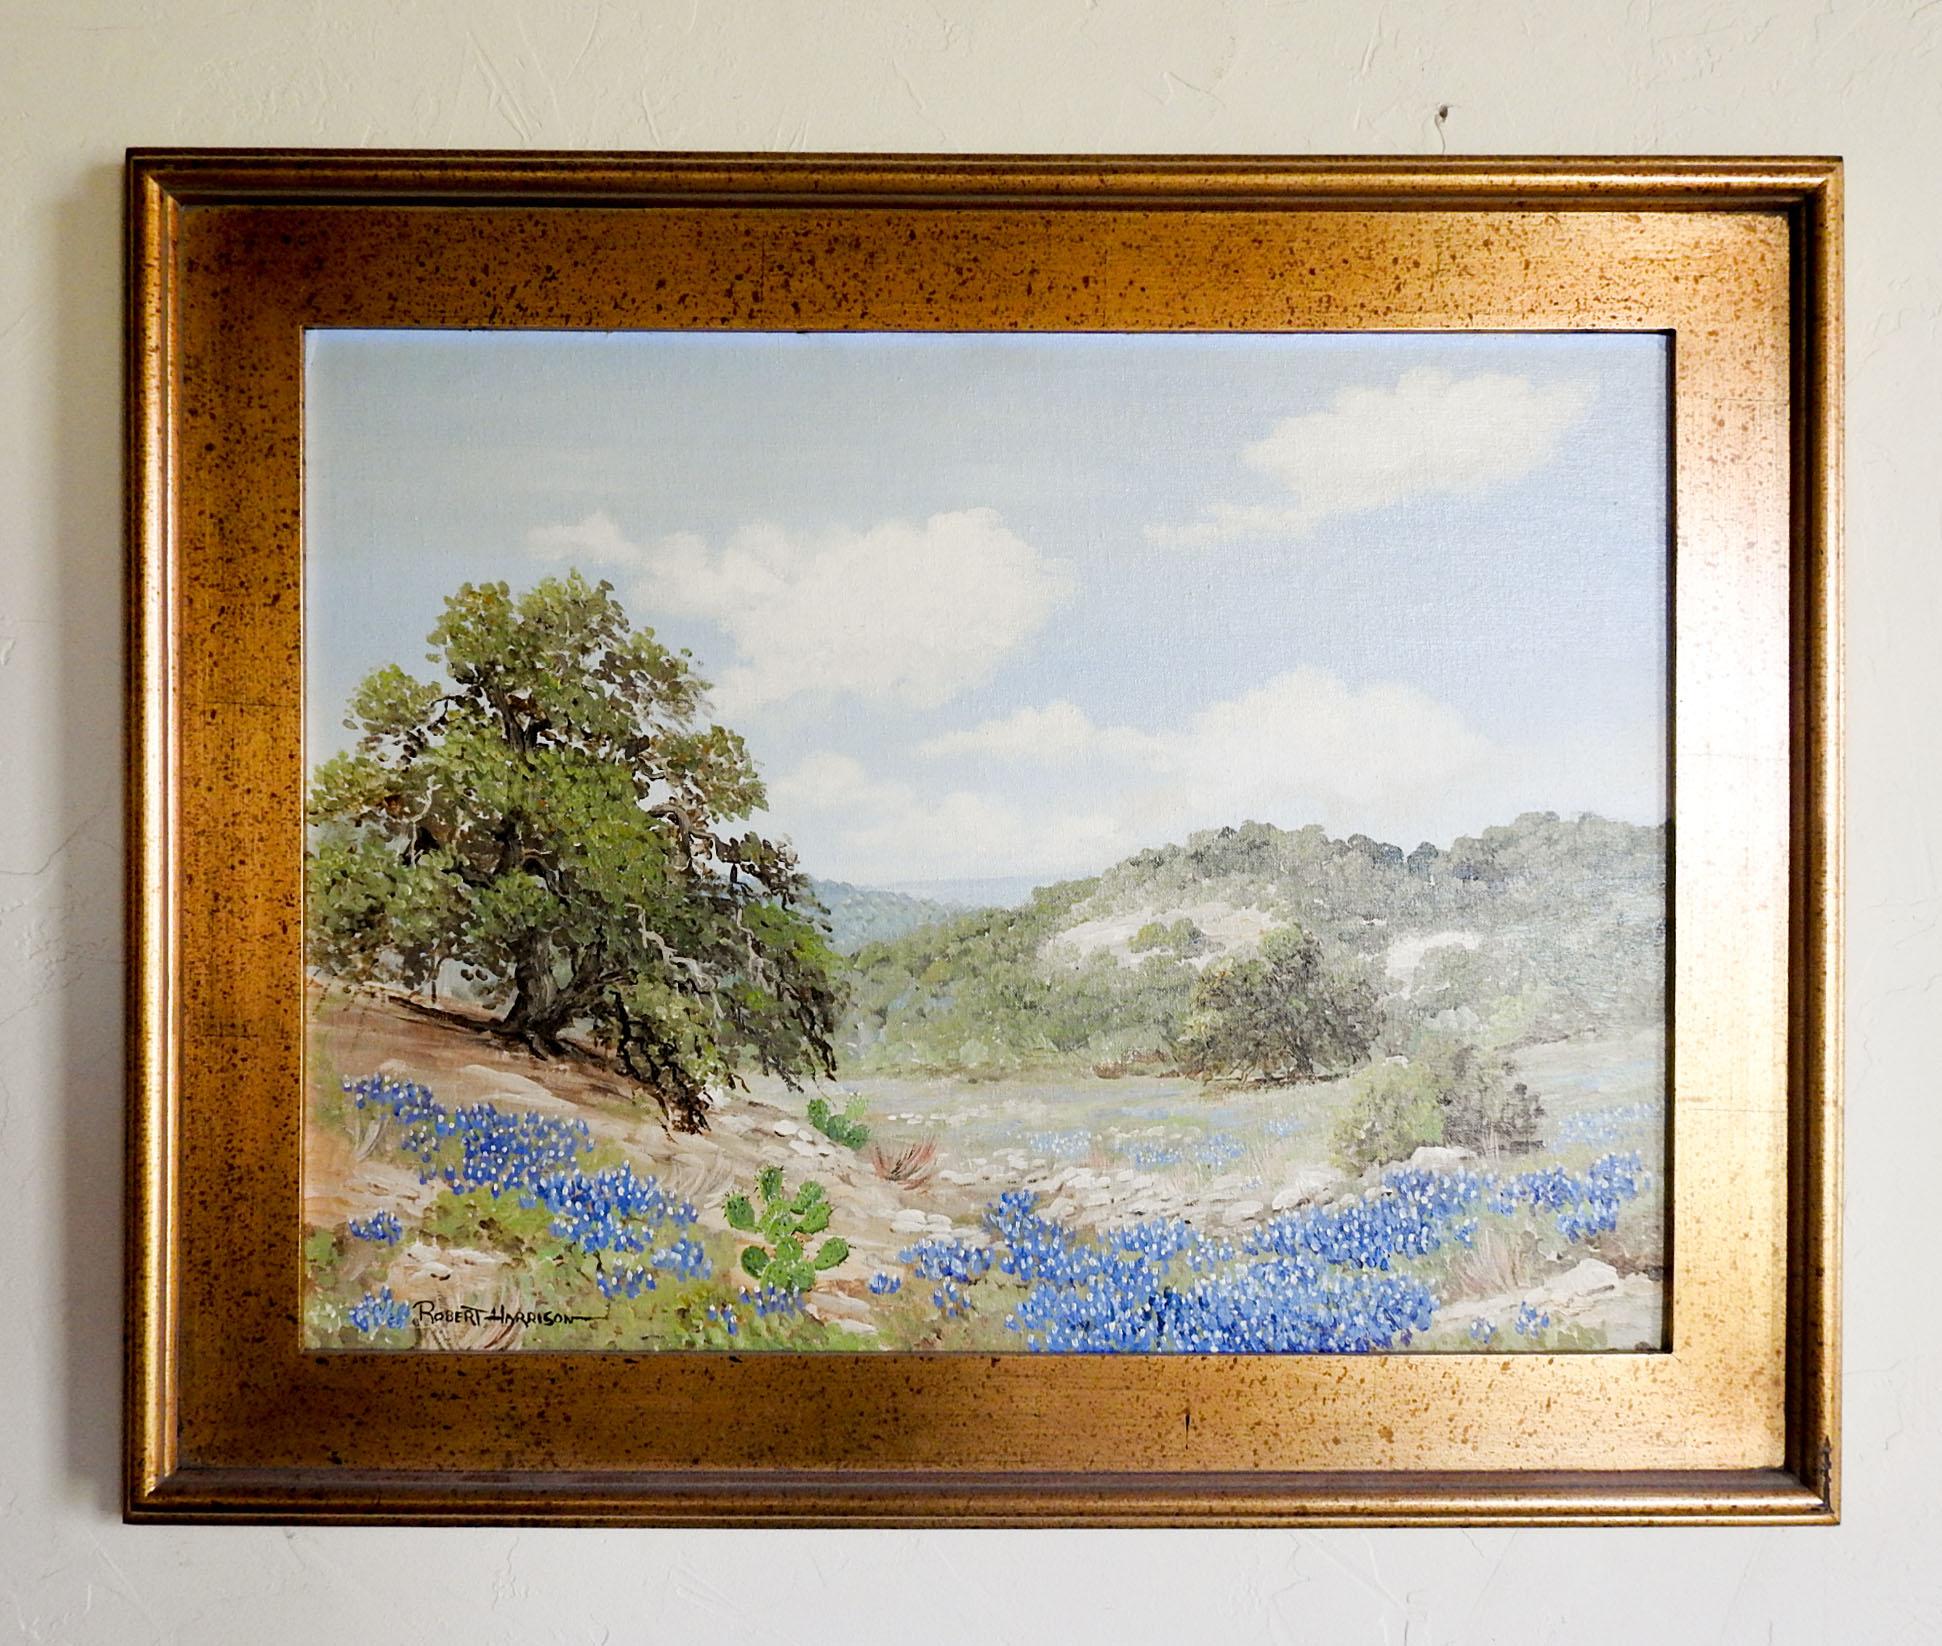 Robert Harrison Bluebonnet Landscape Painting In Good Condition For Sale In Seguin, TX